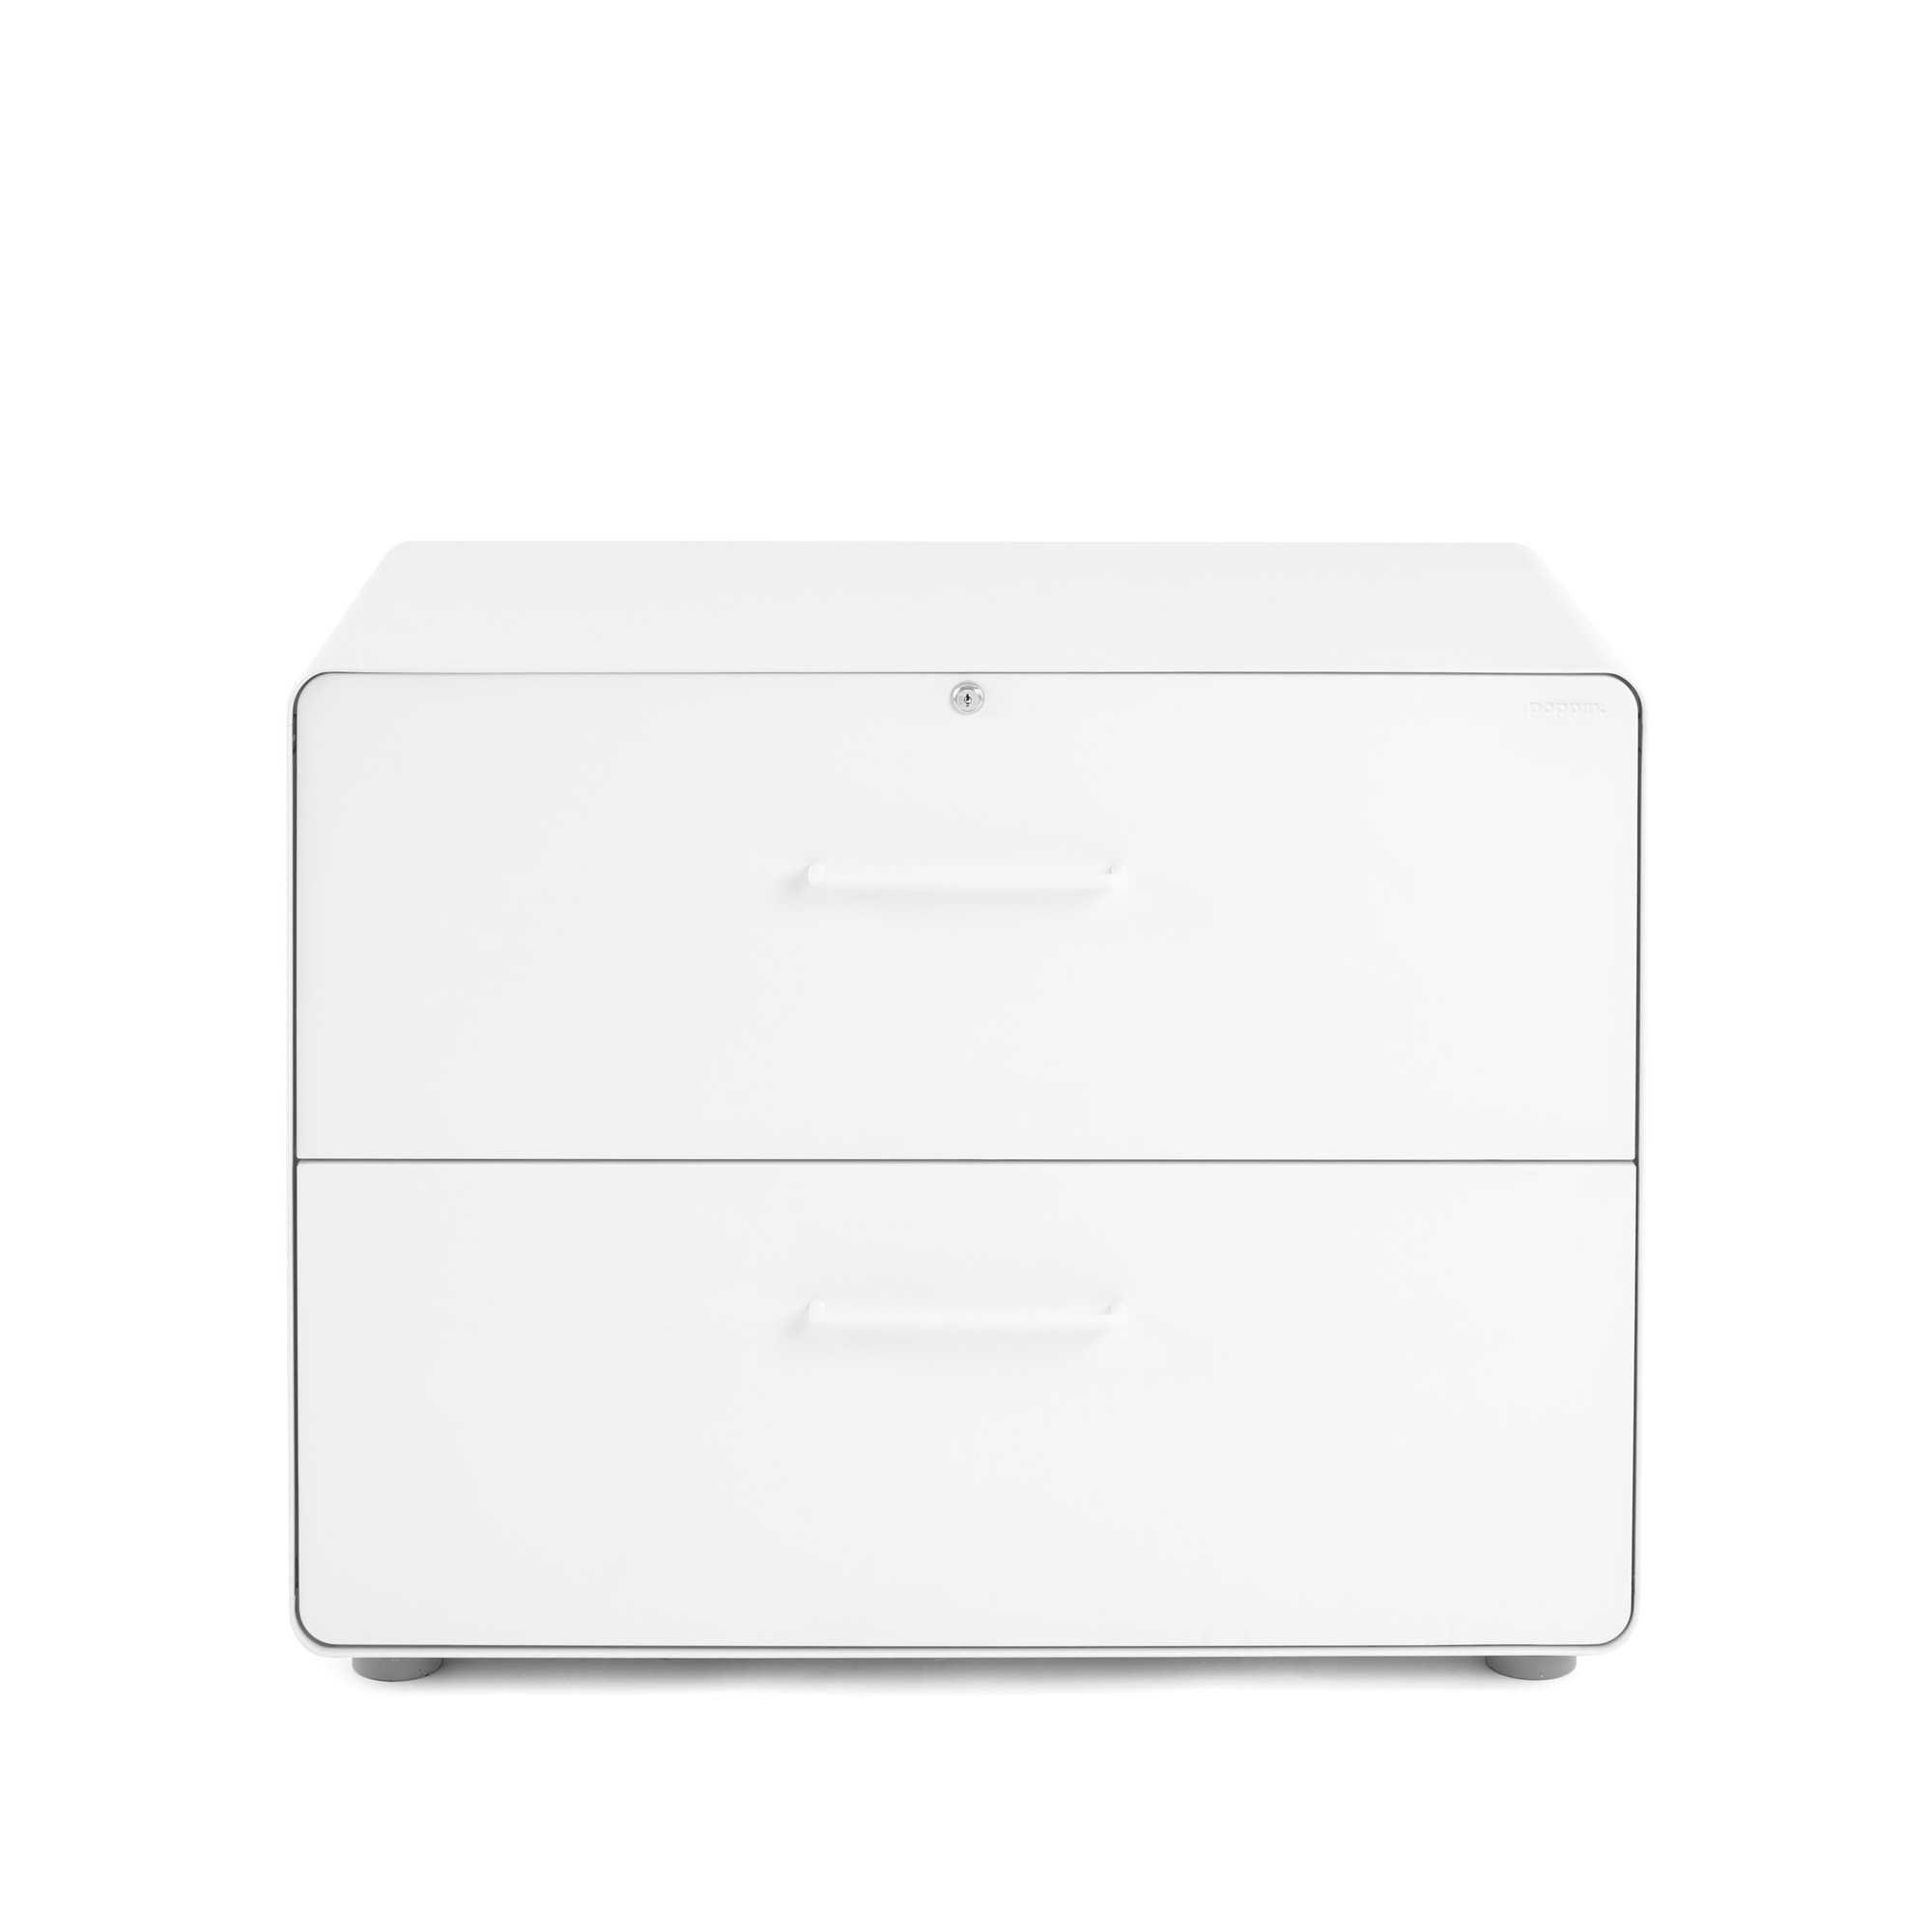 https://poppin.imgix.net/products/2019/poppin_white_stow_2_drawer_lateral_file_cabinet_03.jpg